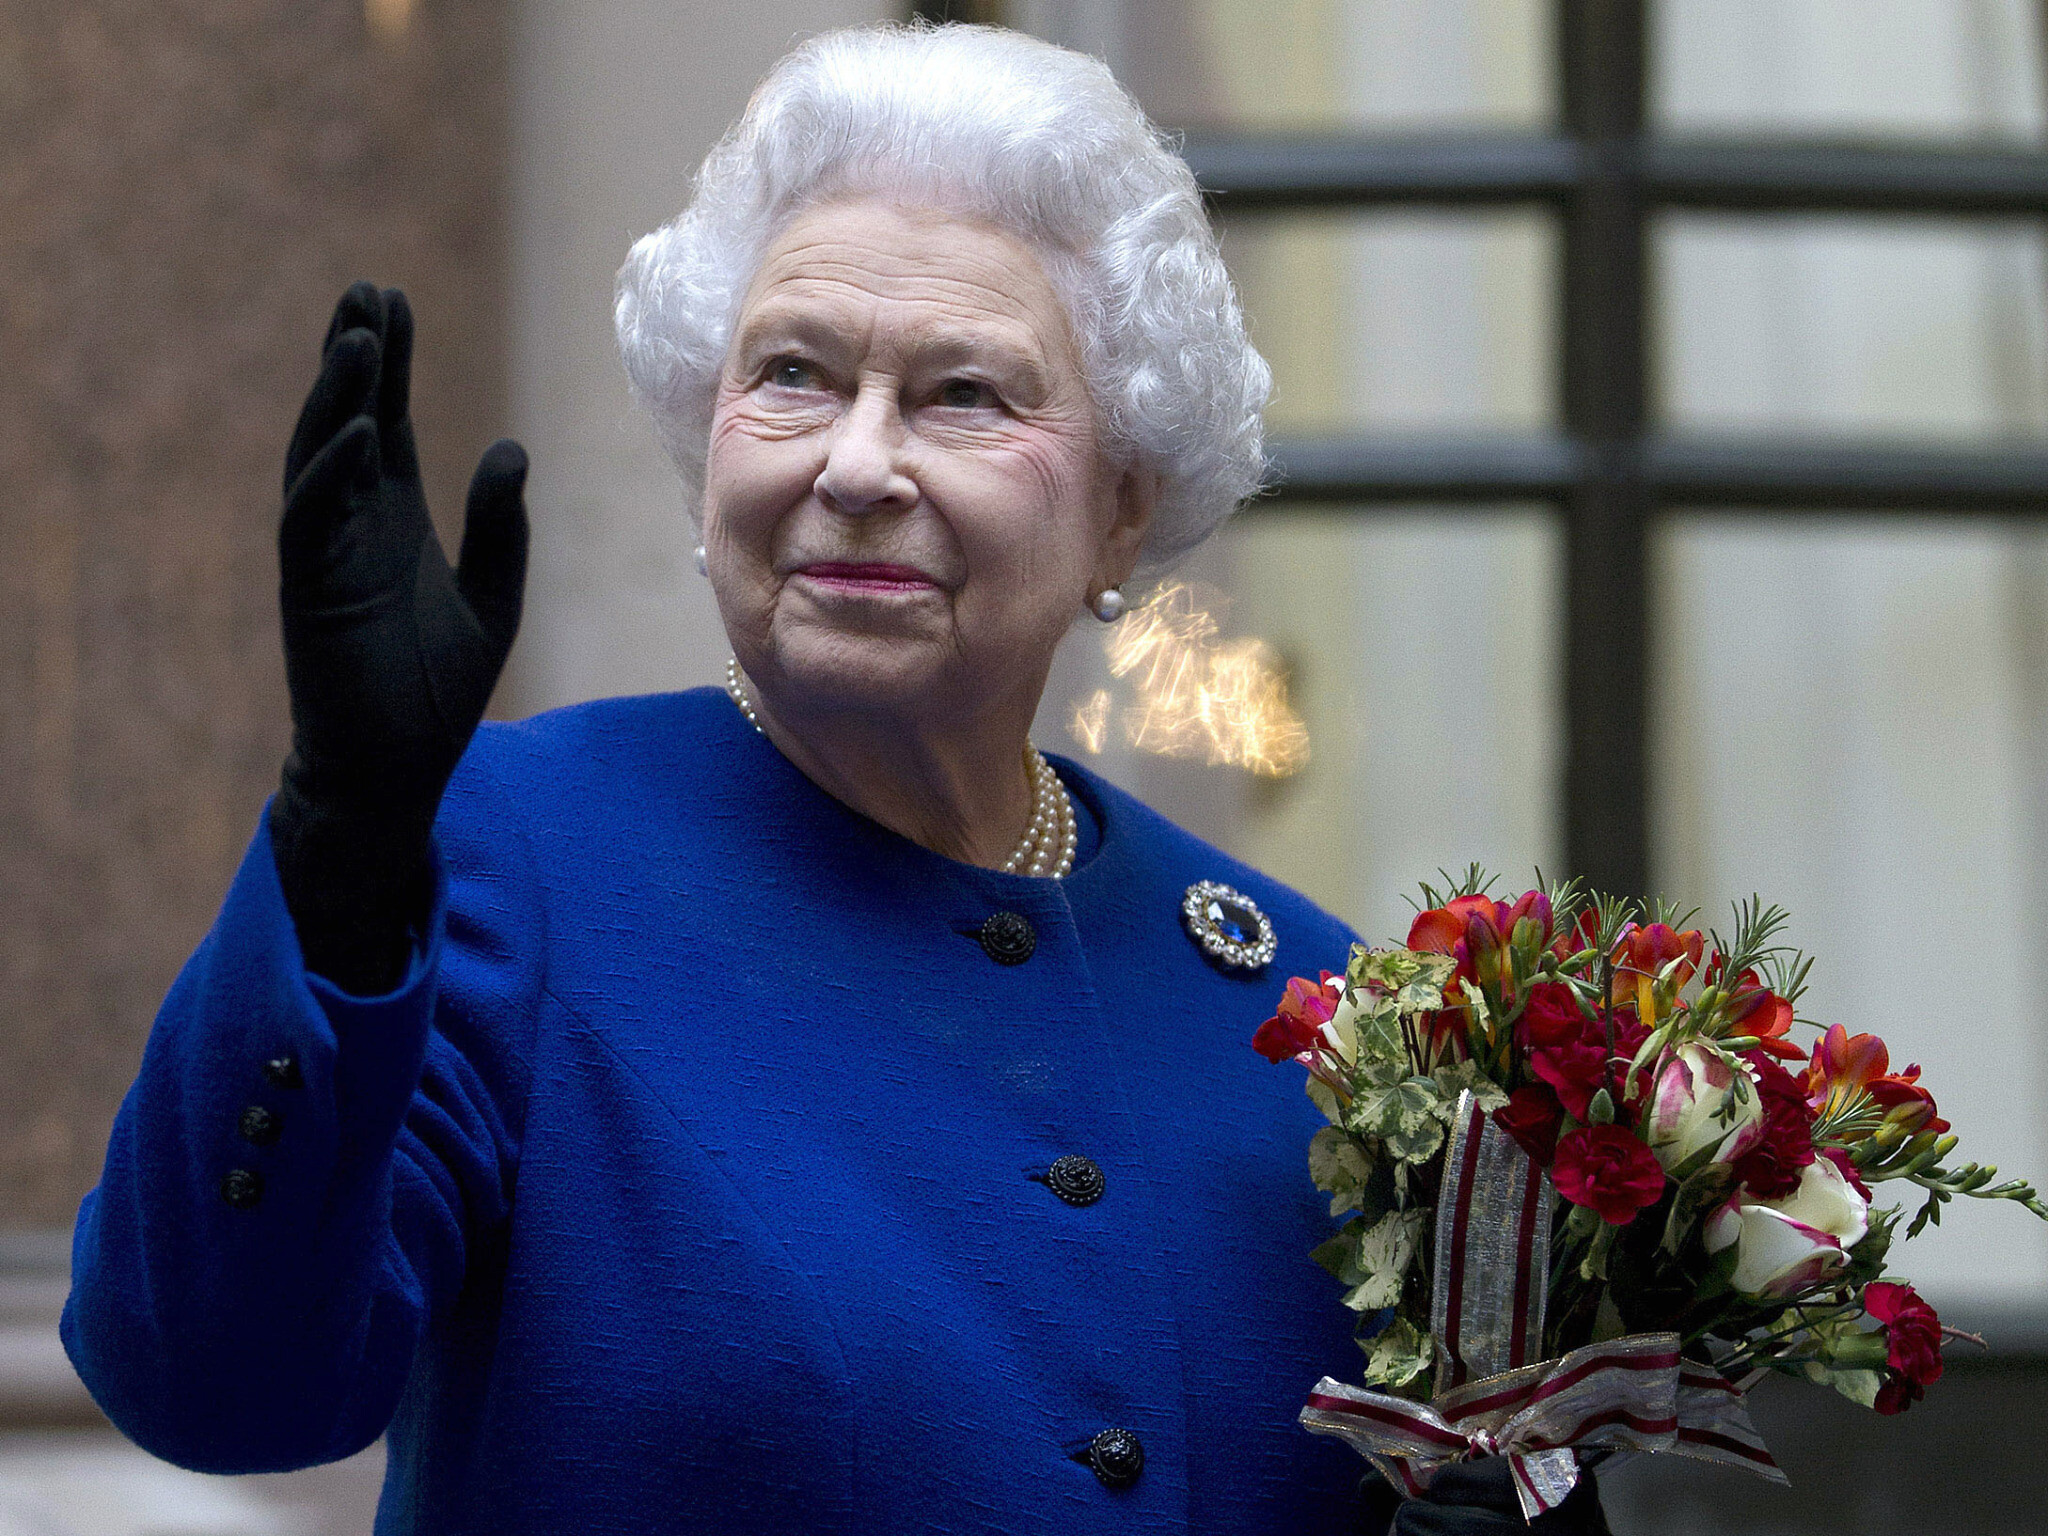 UK unveils plans for 'fitting tribute' to Queen Elizabeth II | The ...